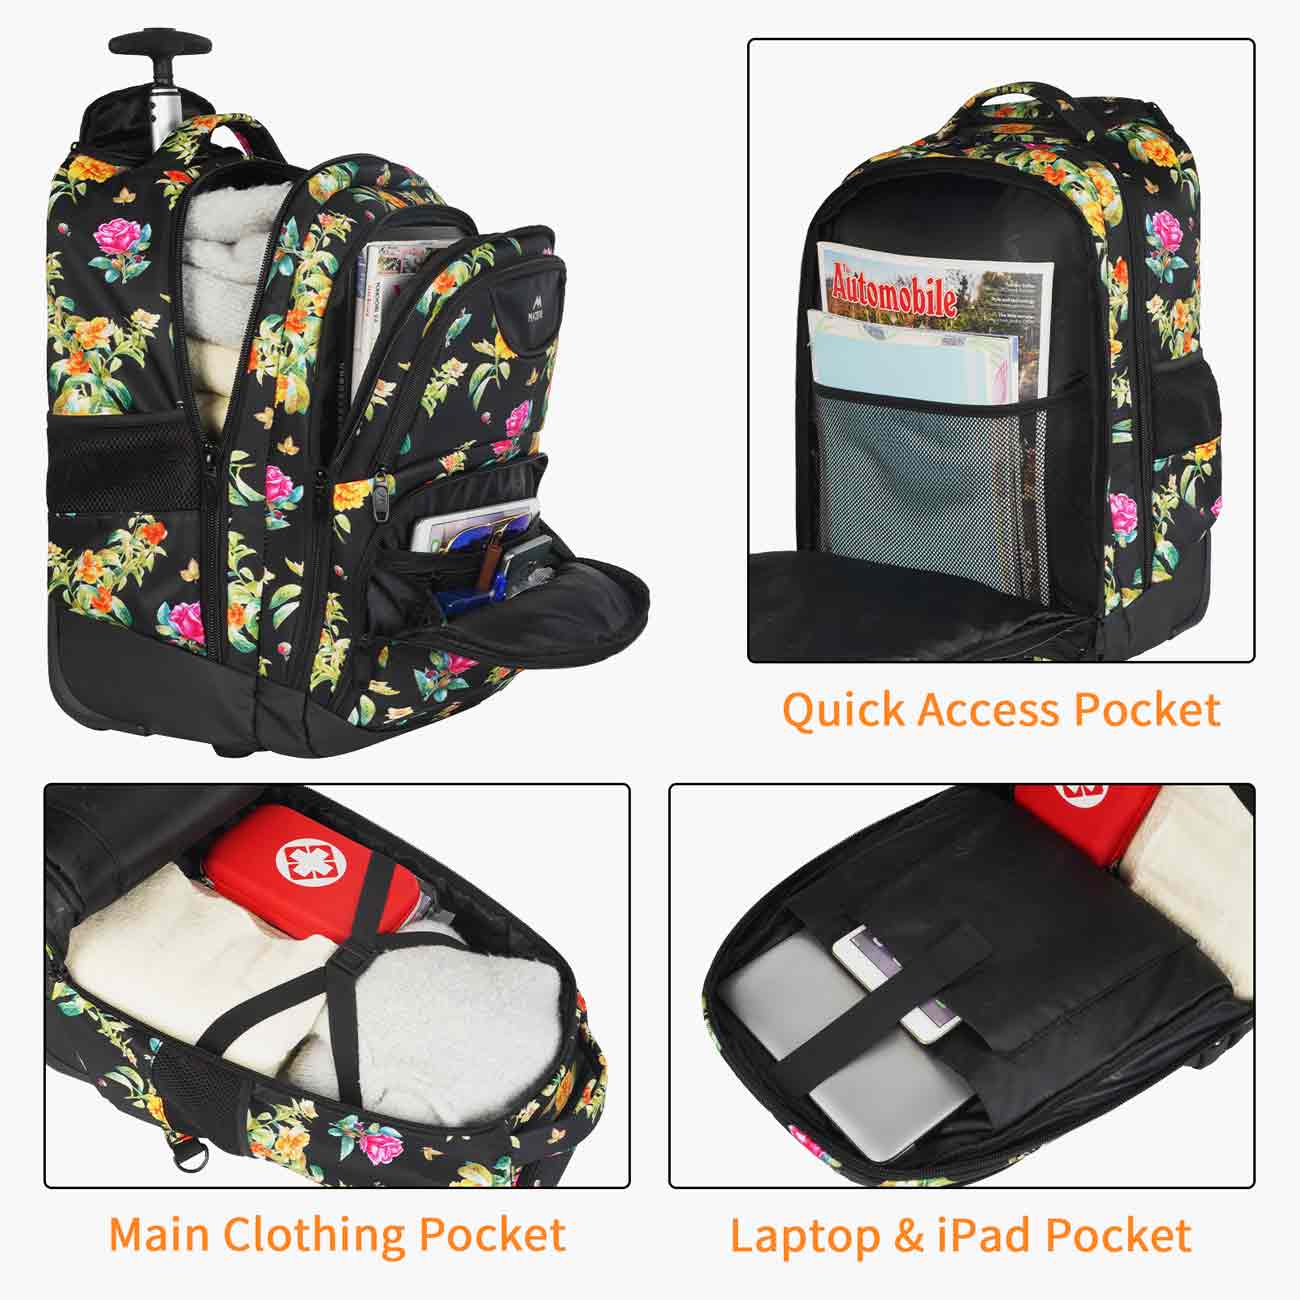 Matein Floral Wheeled Rolling Backpack-rolling laptop backpack